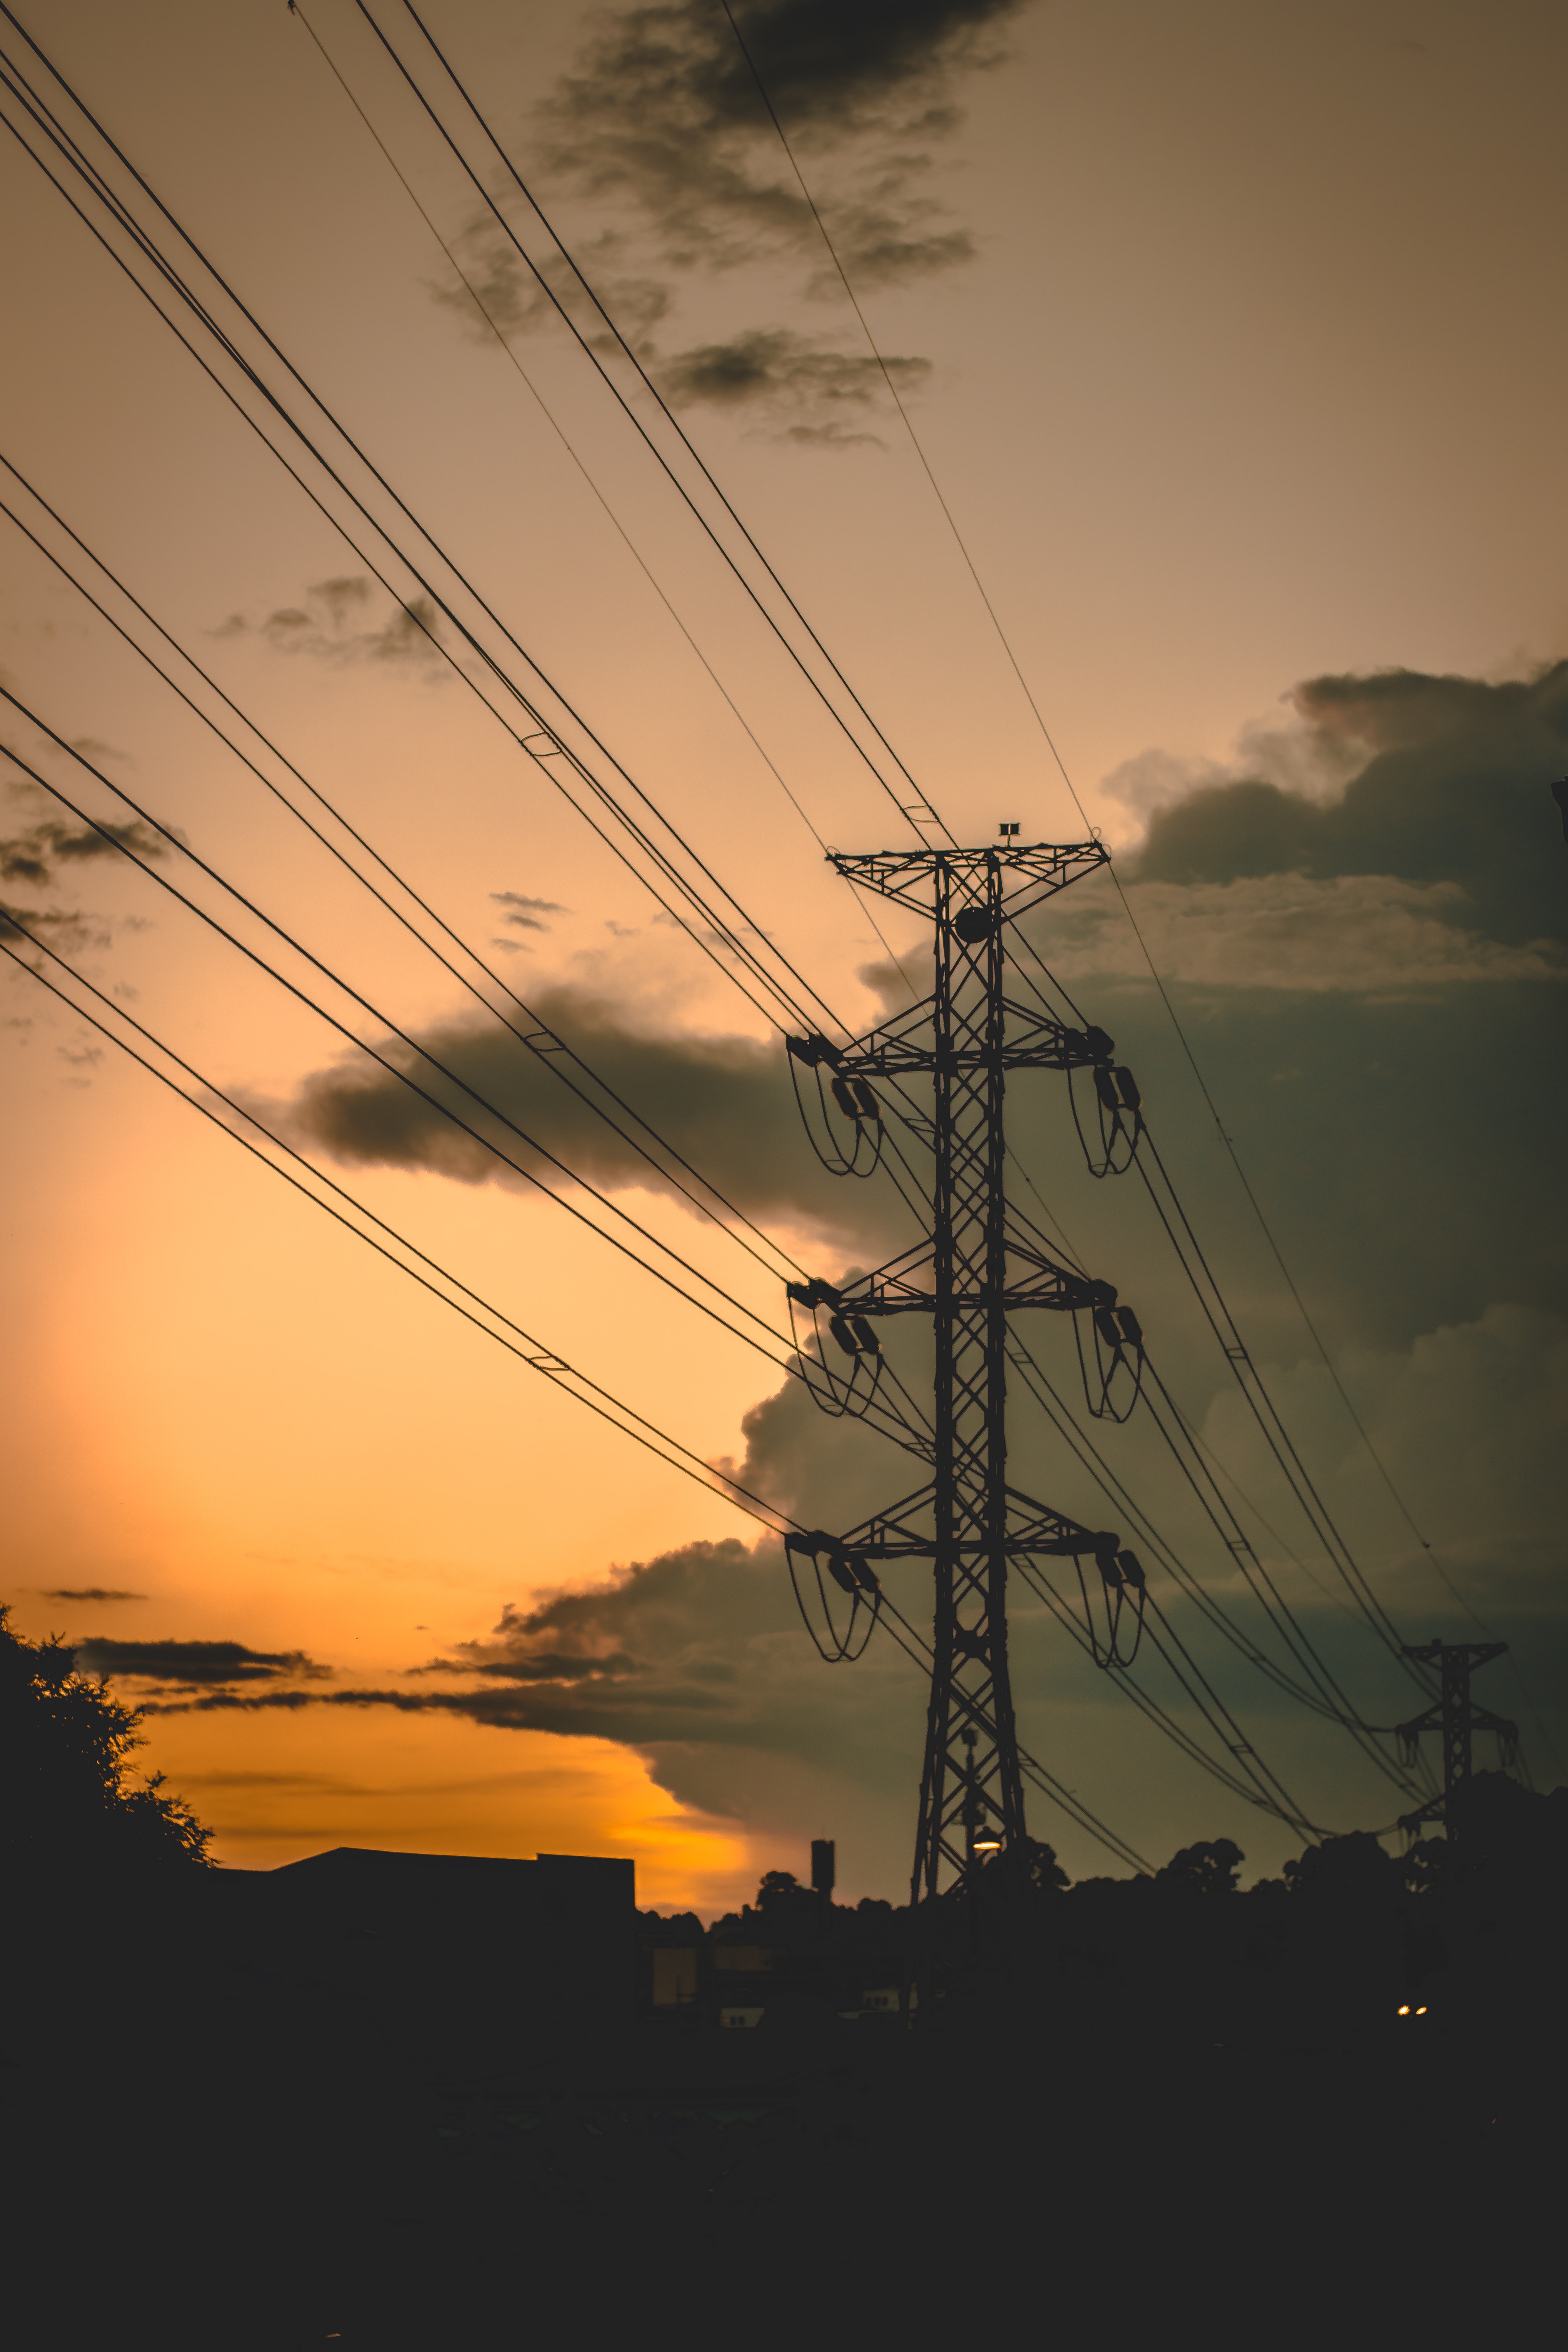 Financially Sound Utilities Are Imperative for Universal Access to Affordable and Clean Energy